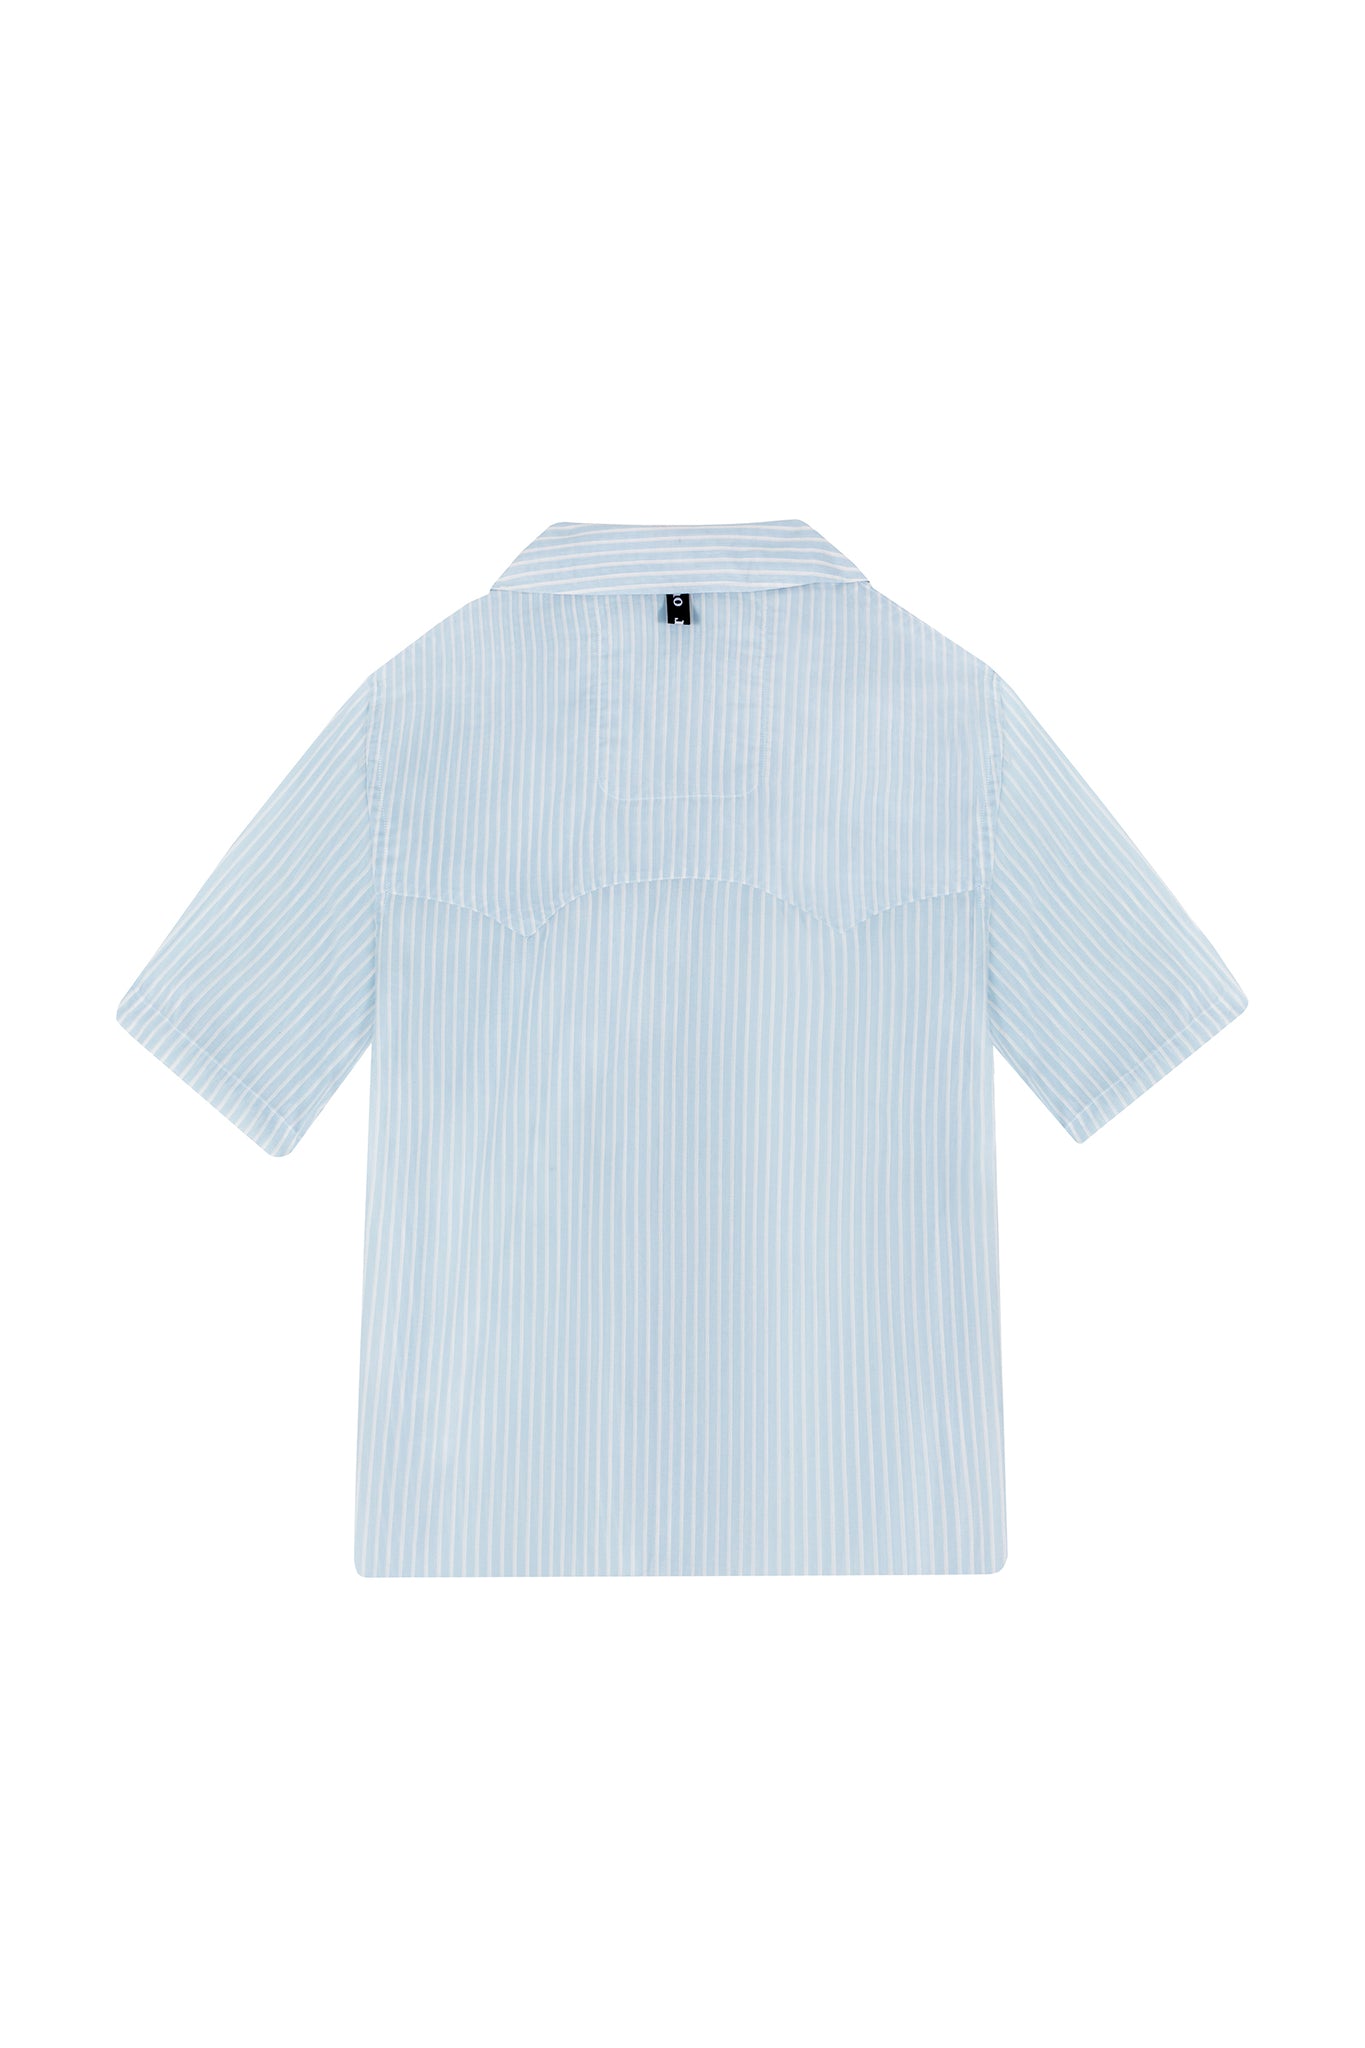 THE SHORT SLEEVE WESTERN SHIRT IN STRIPED VOILE